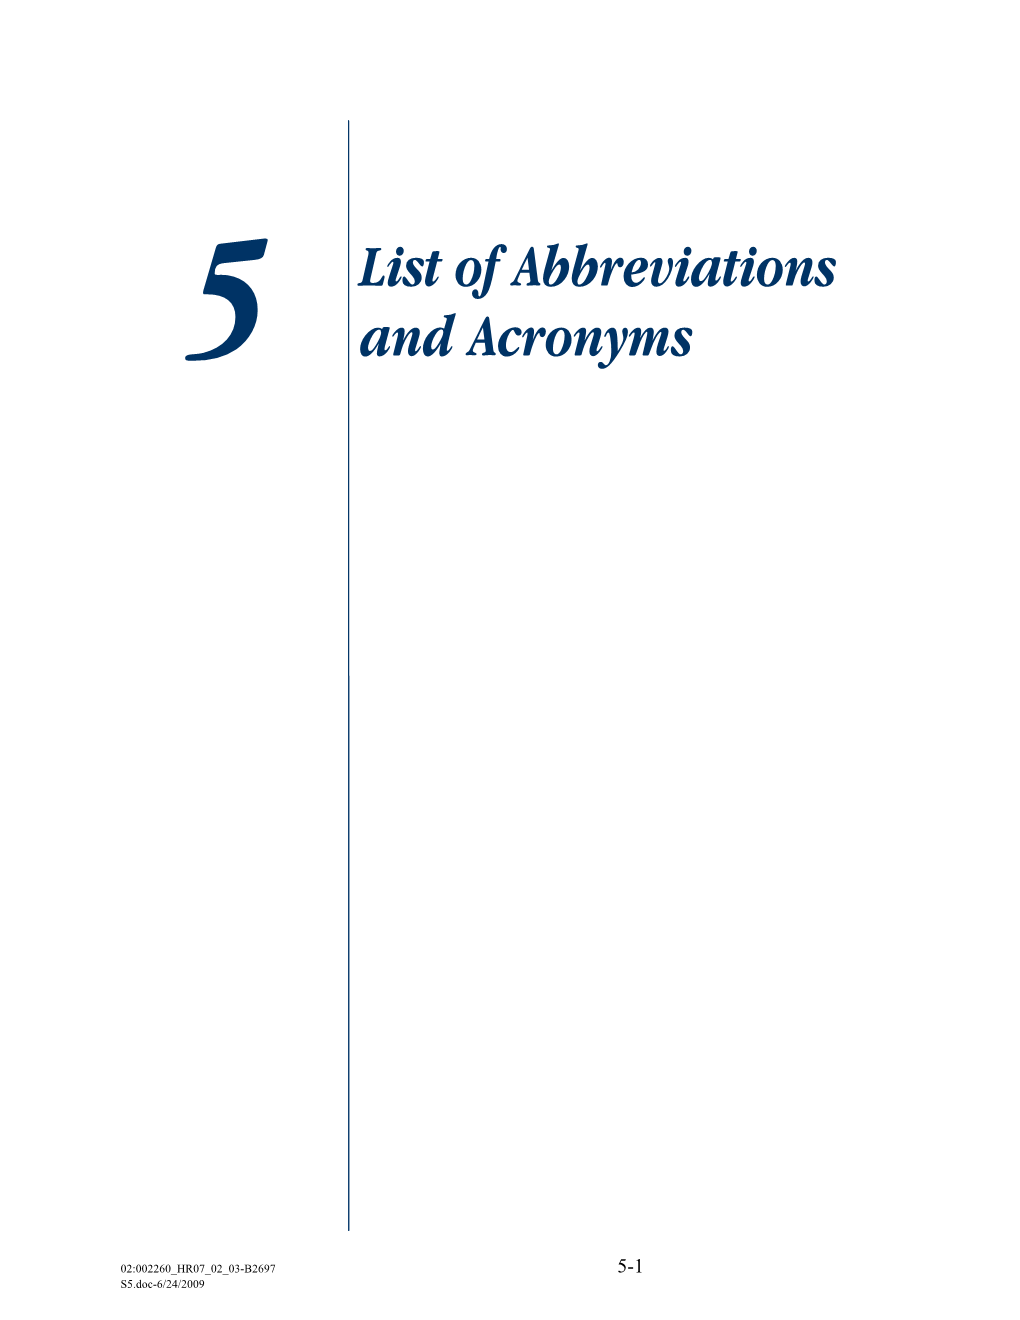 List of Abbreviations and Acronyms